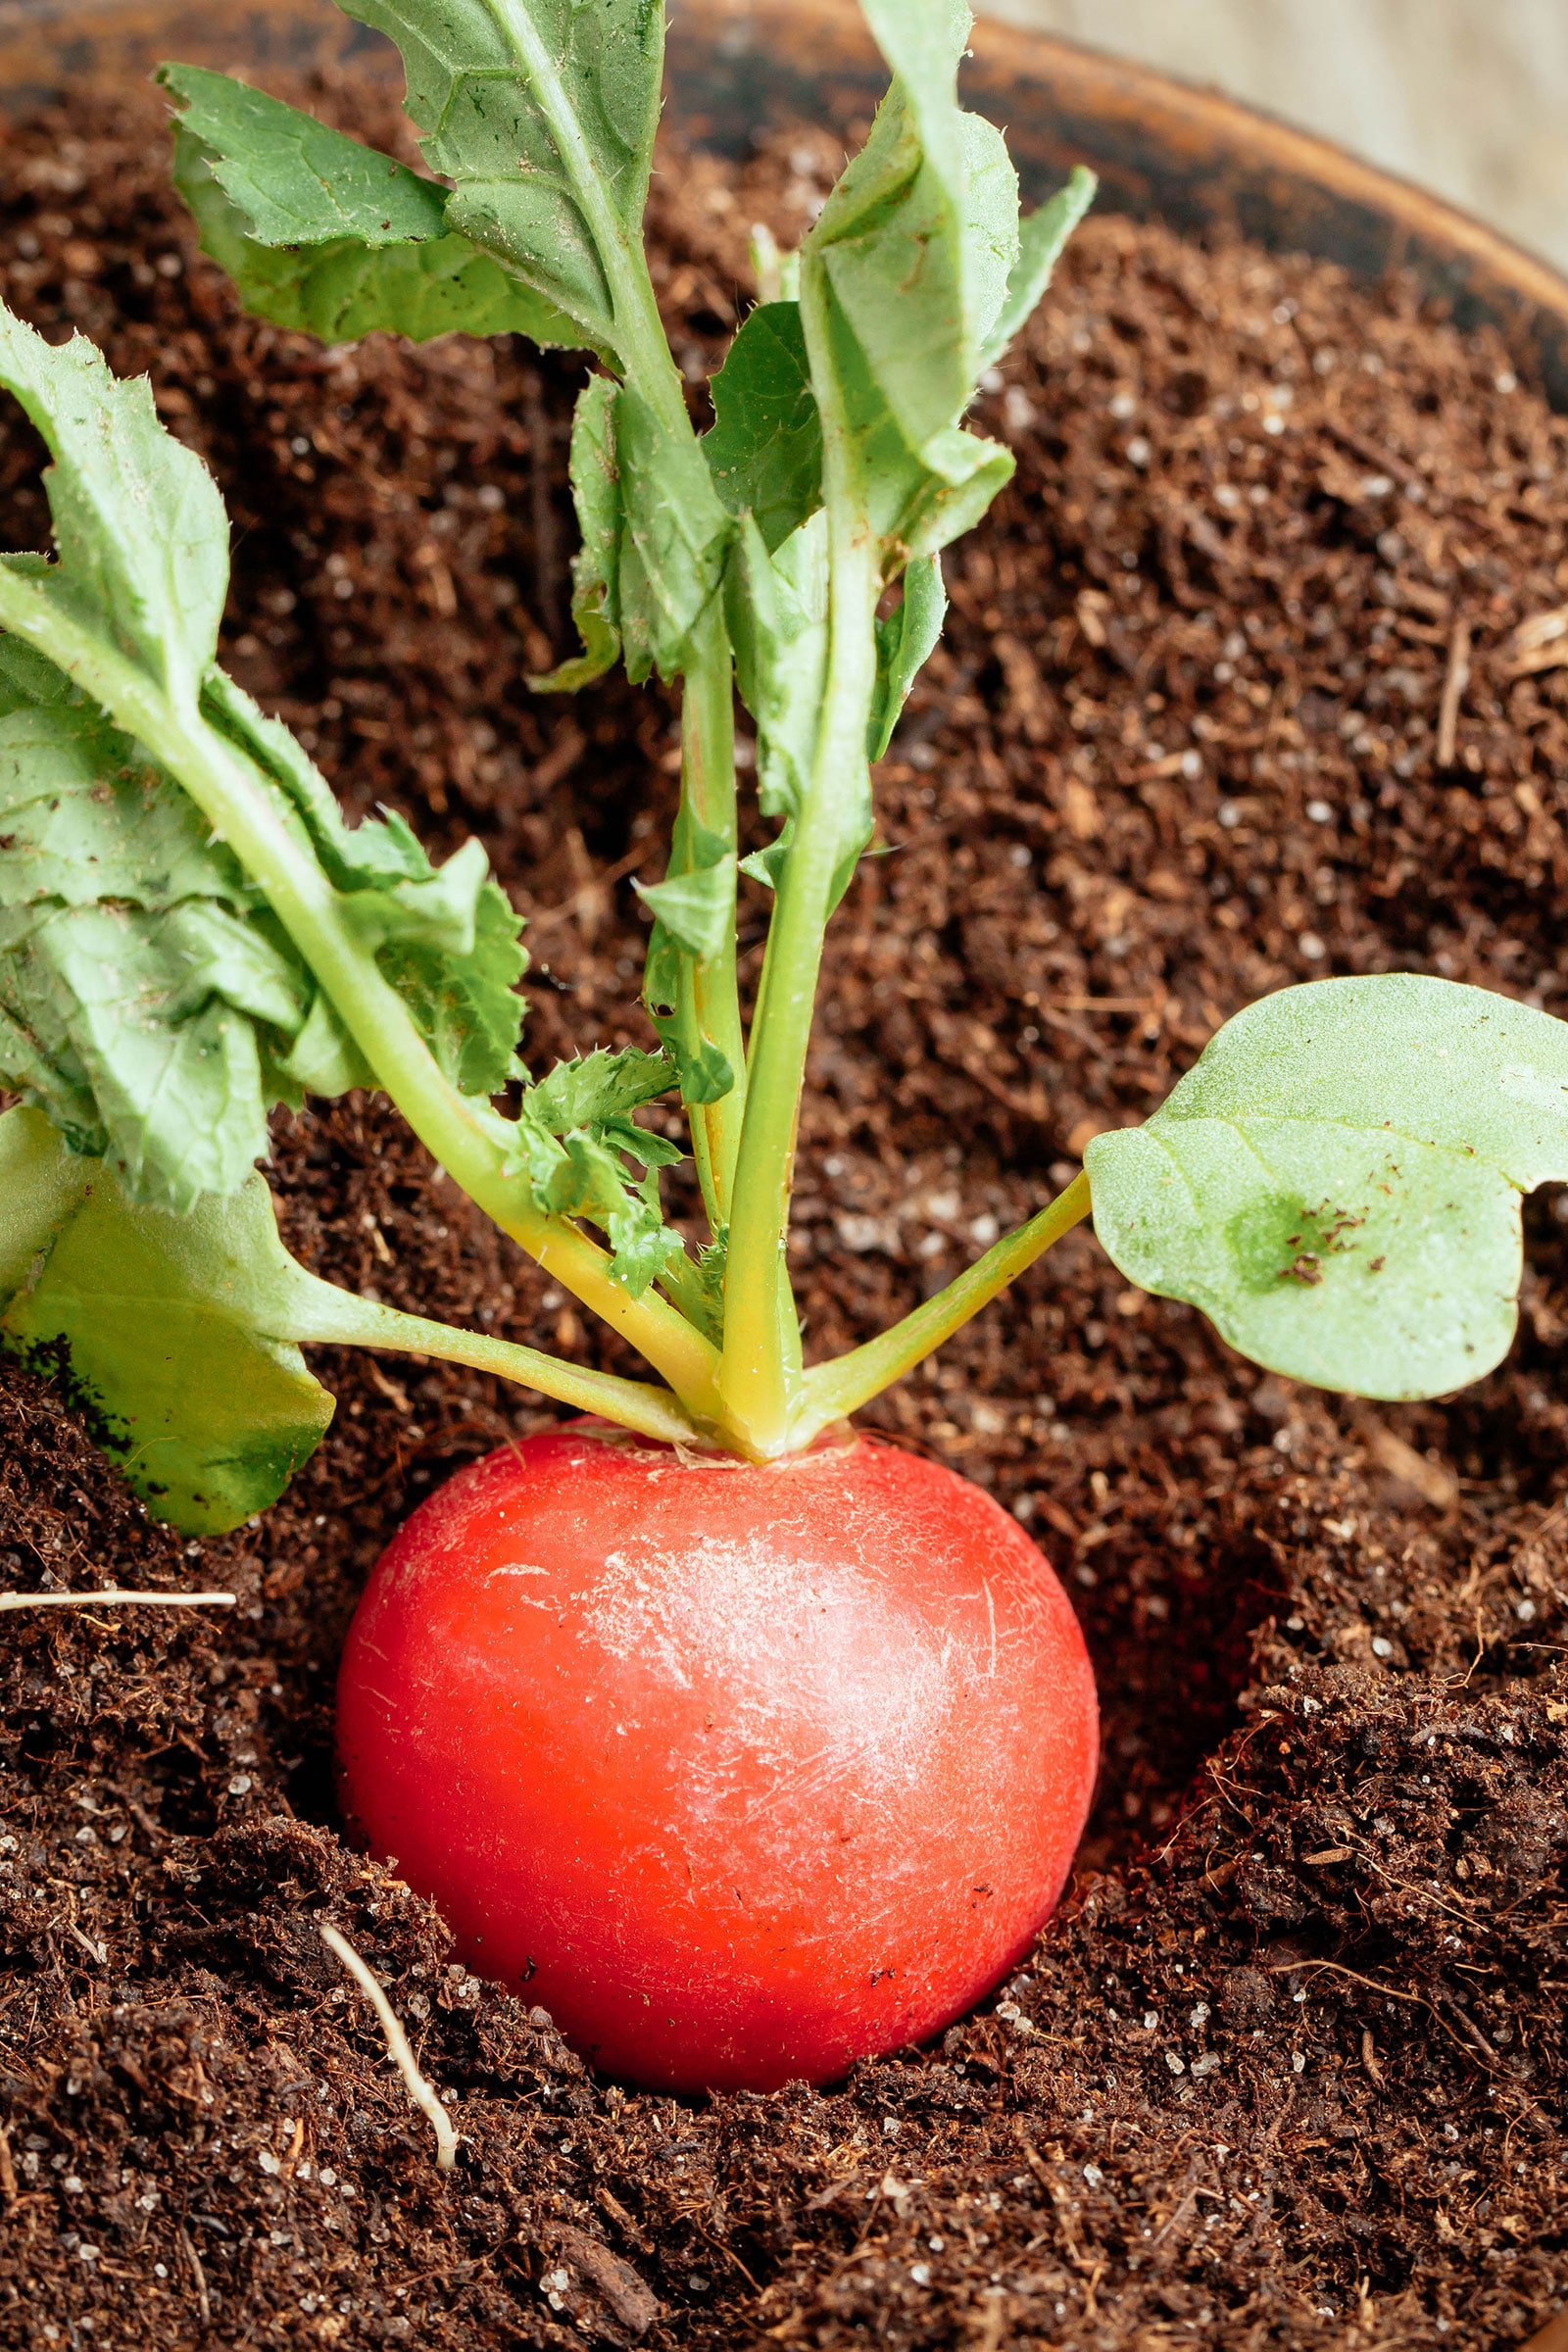 Red radish growing in a container